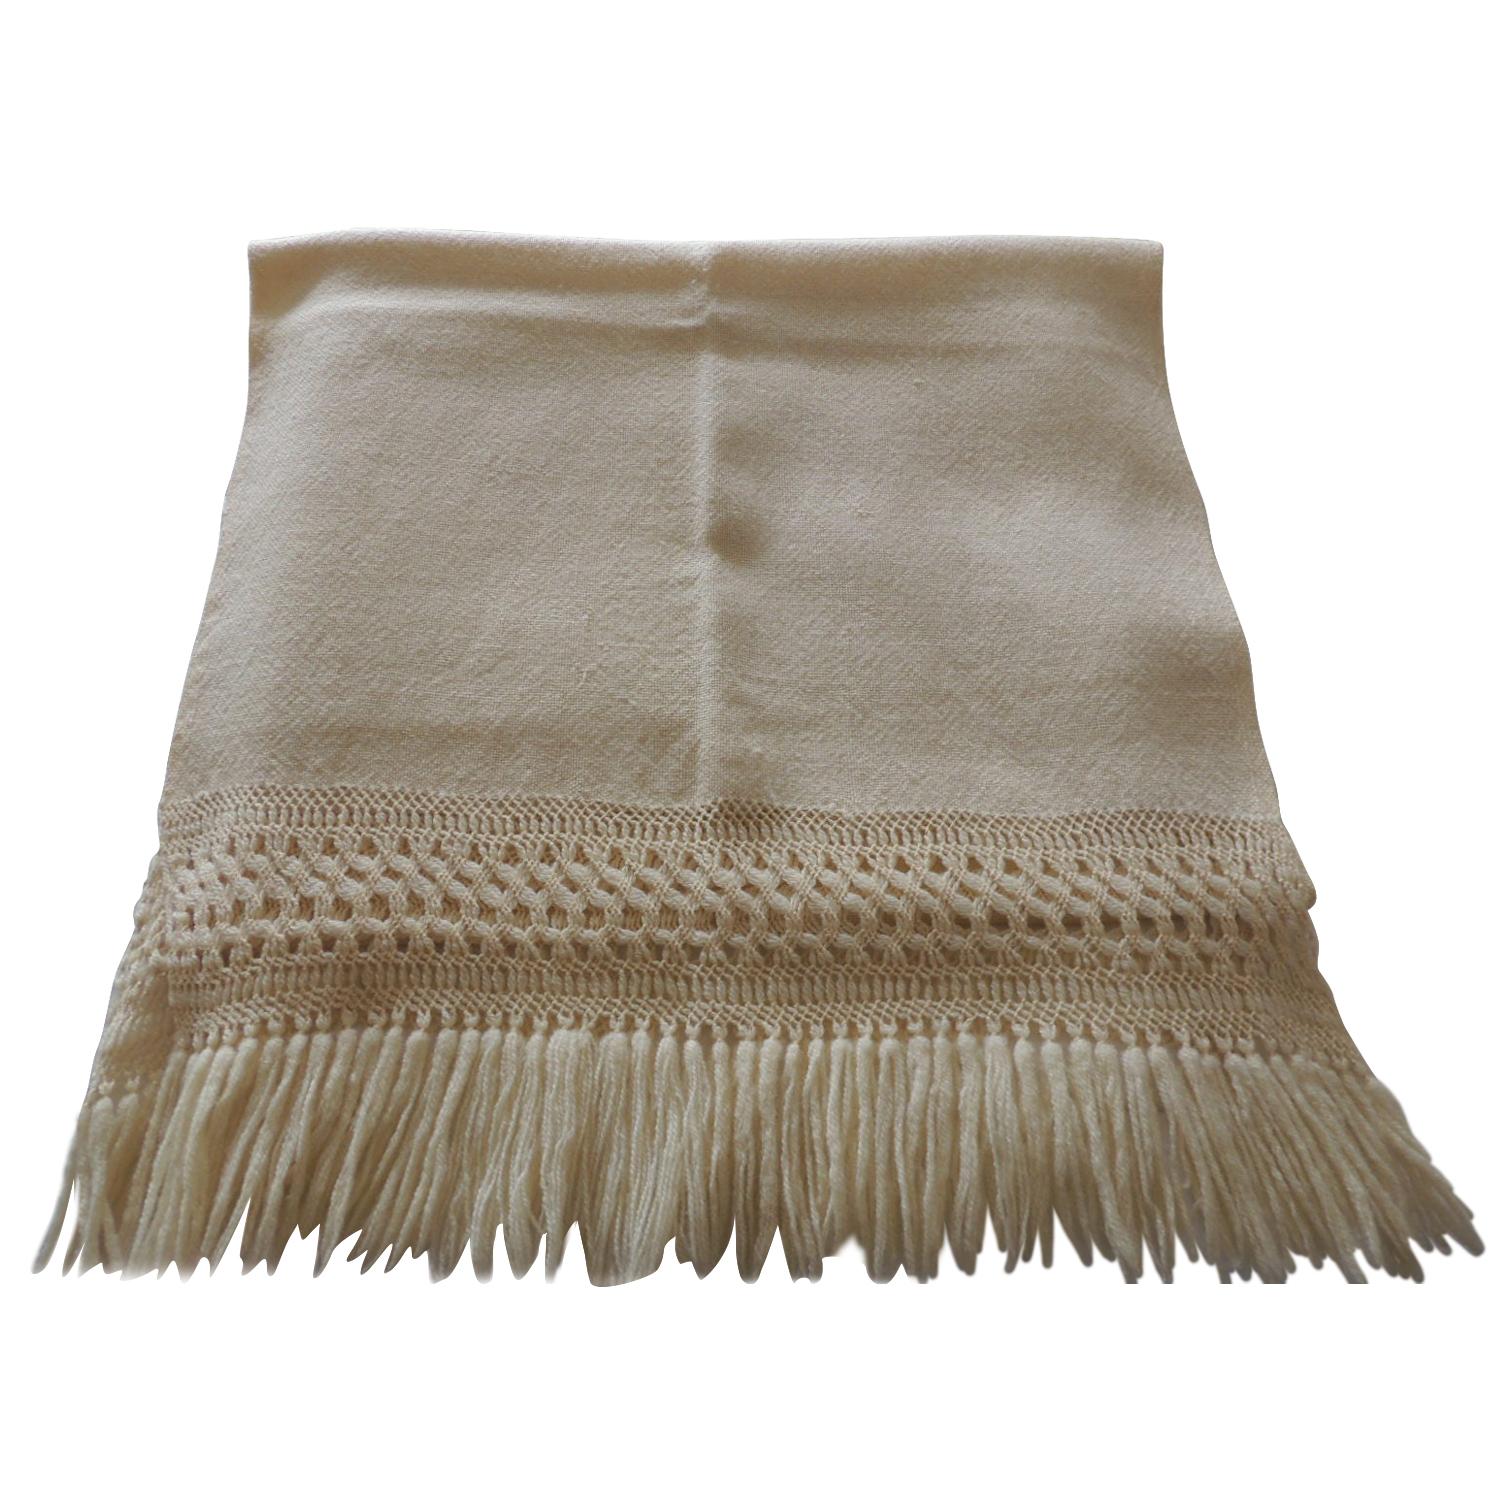 Vintage Beige Handwoven Throw with Hand Knotted Fringes